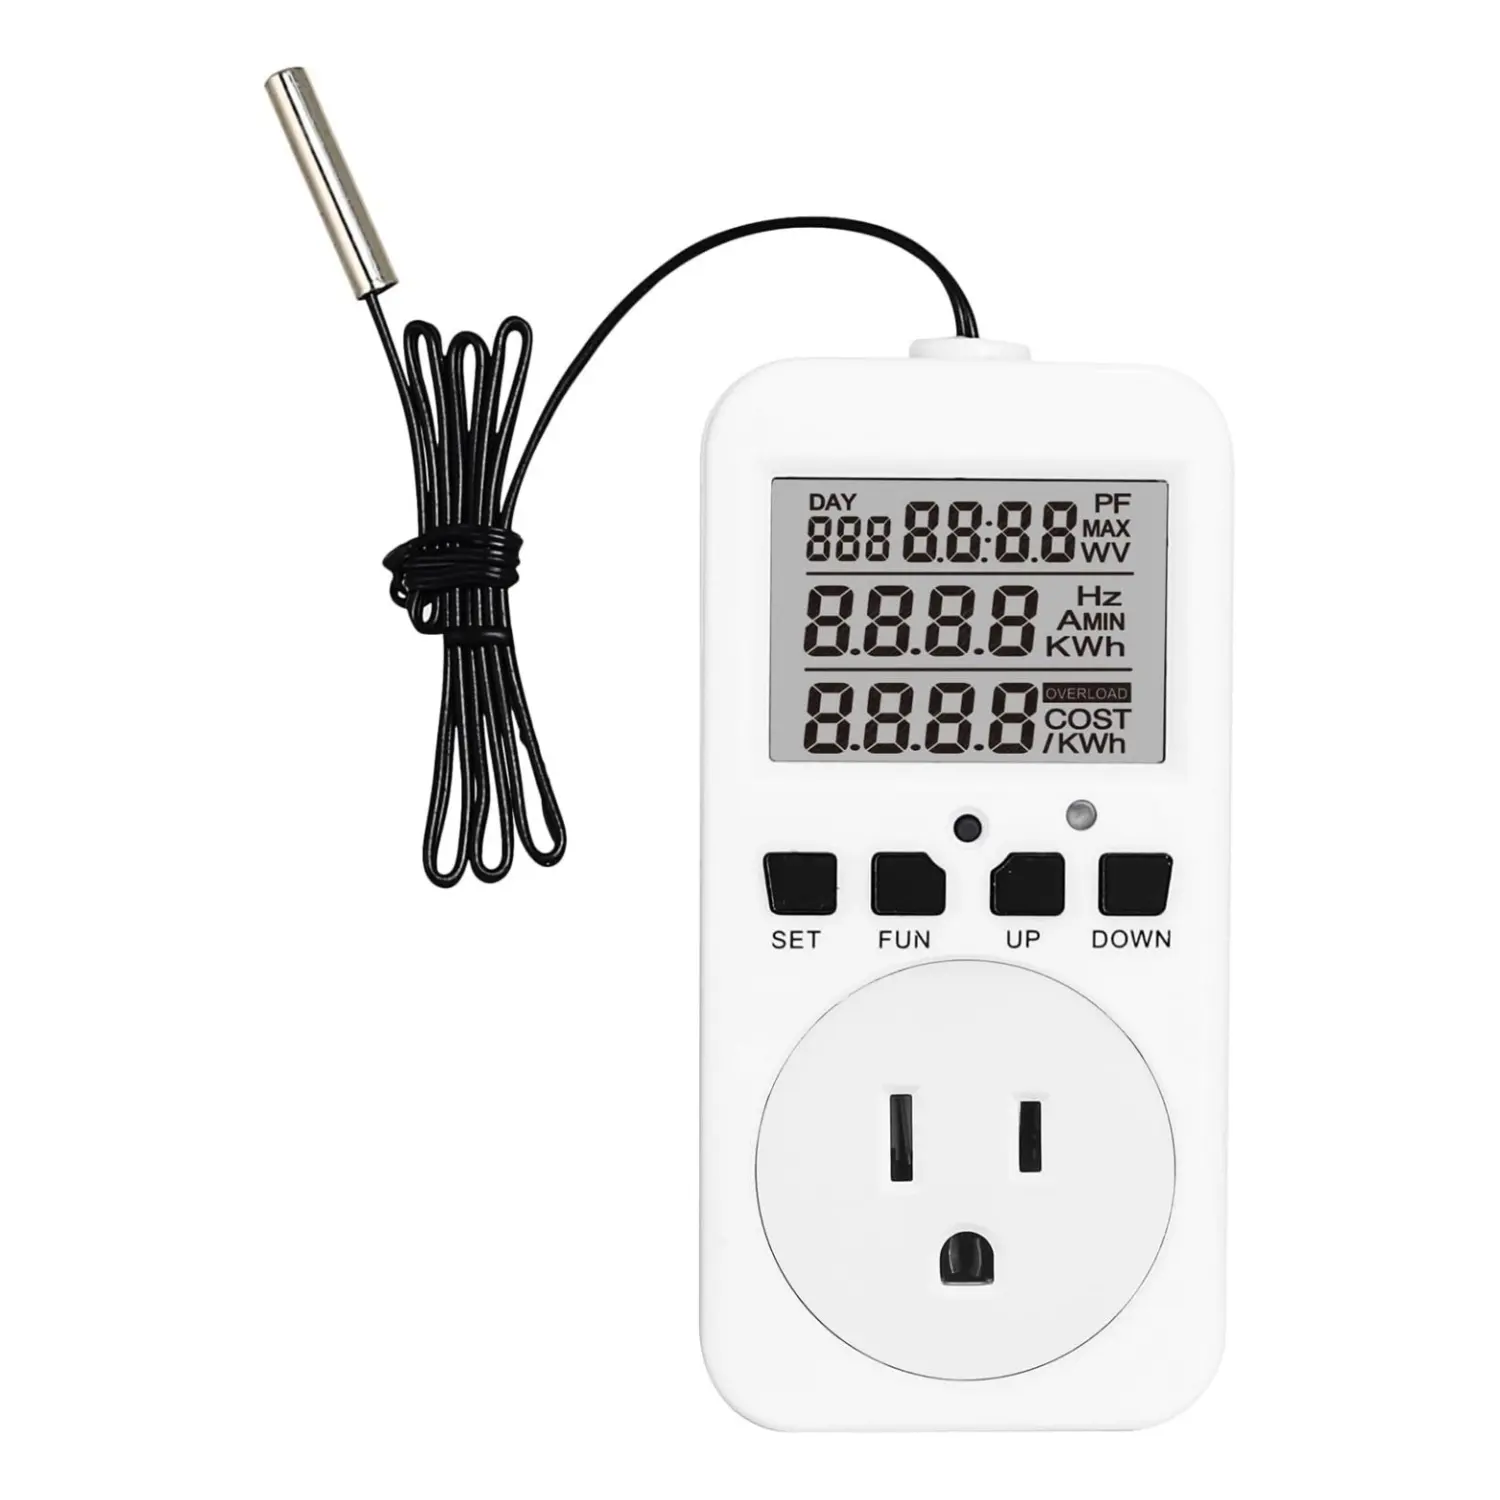 Digital Thermostat Outlet Reptile Temperature Controller Outlet Heating Cooling Control for Incubator Greenhouse Terrarium